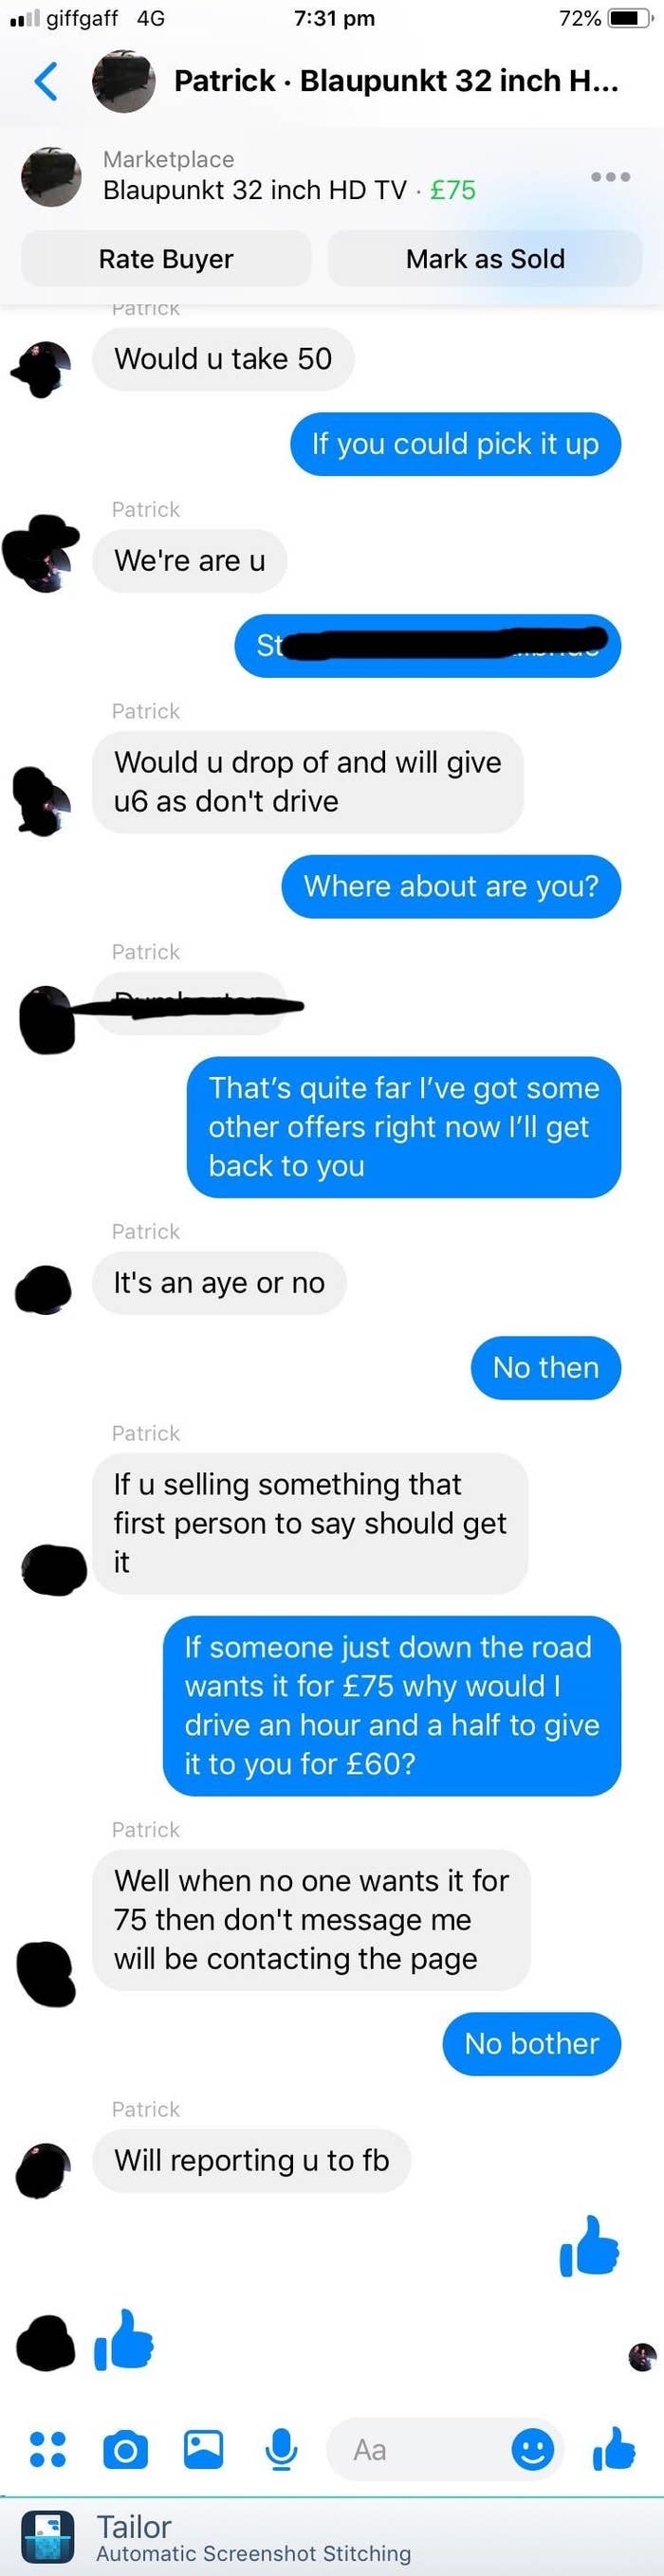 17 Facebook Marketplace Screenshots That Are Pretty Infuriating